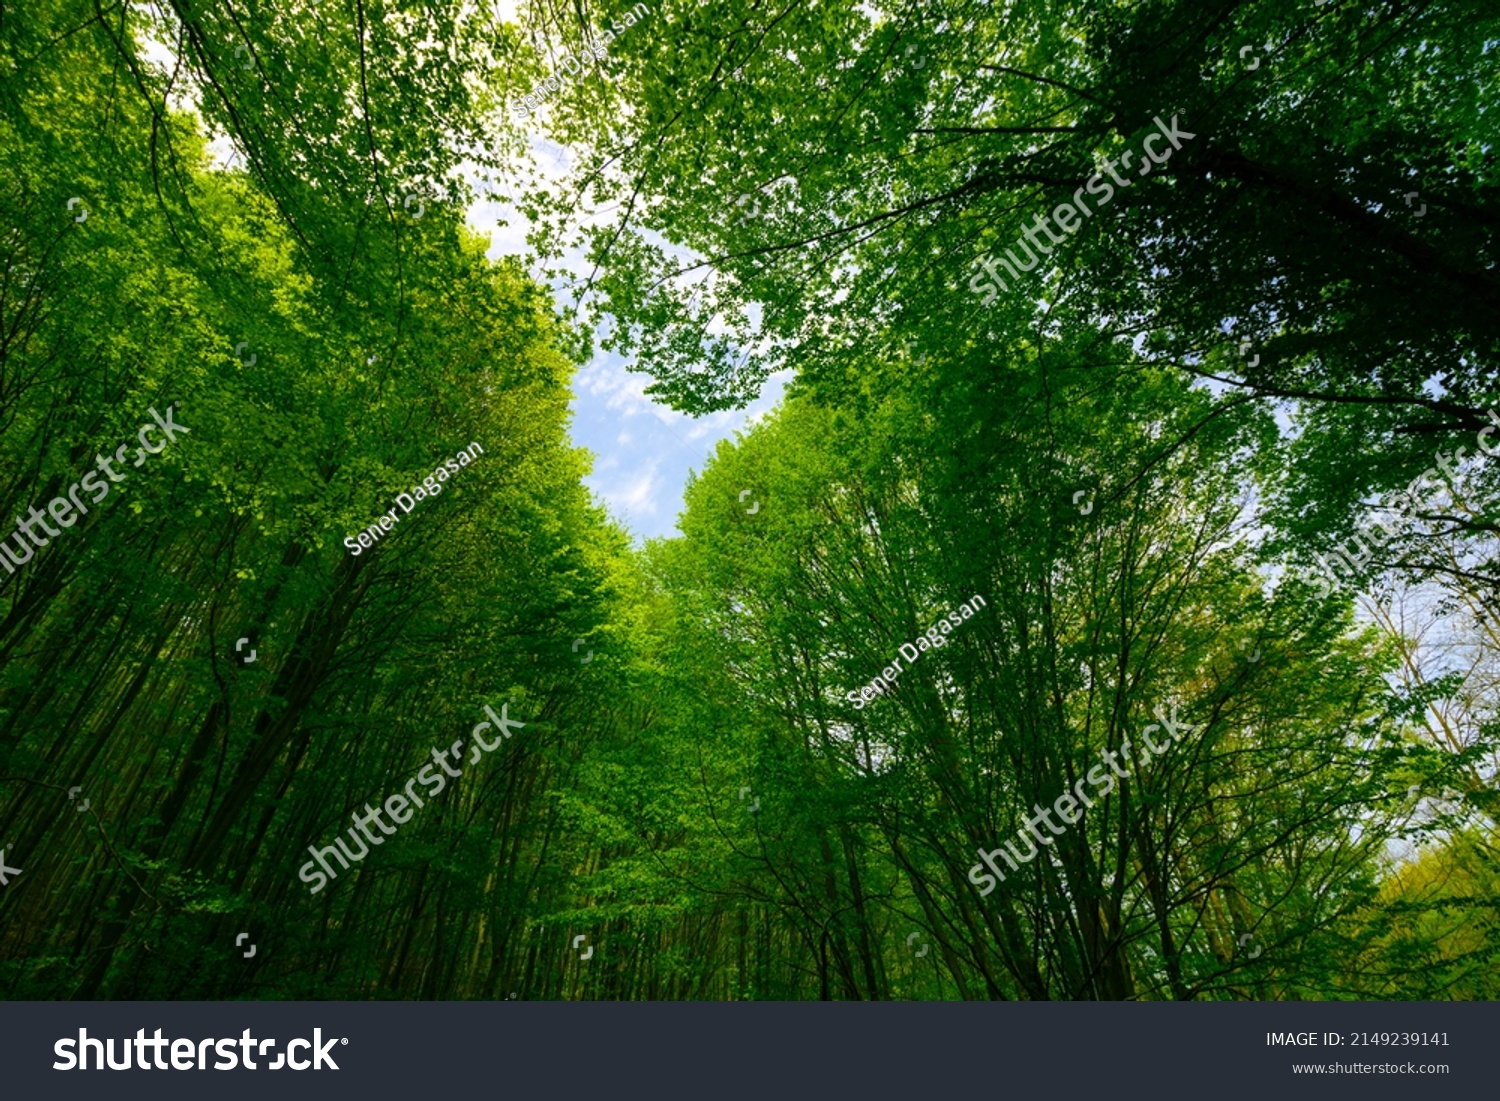 Carbon neutral or carbon net-zero concept background photo. Low angle view of lush forest. #2149239141